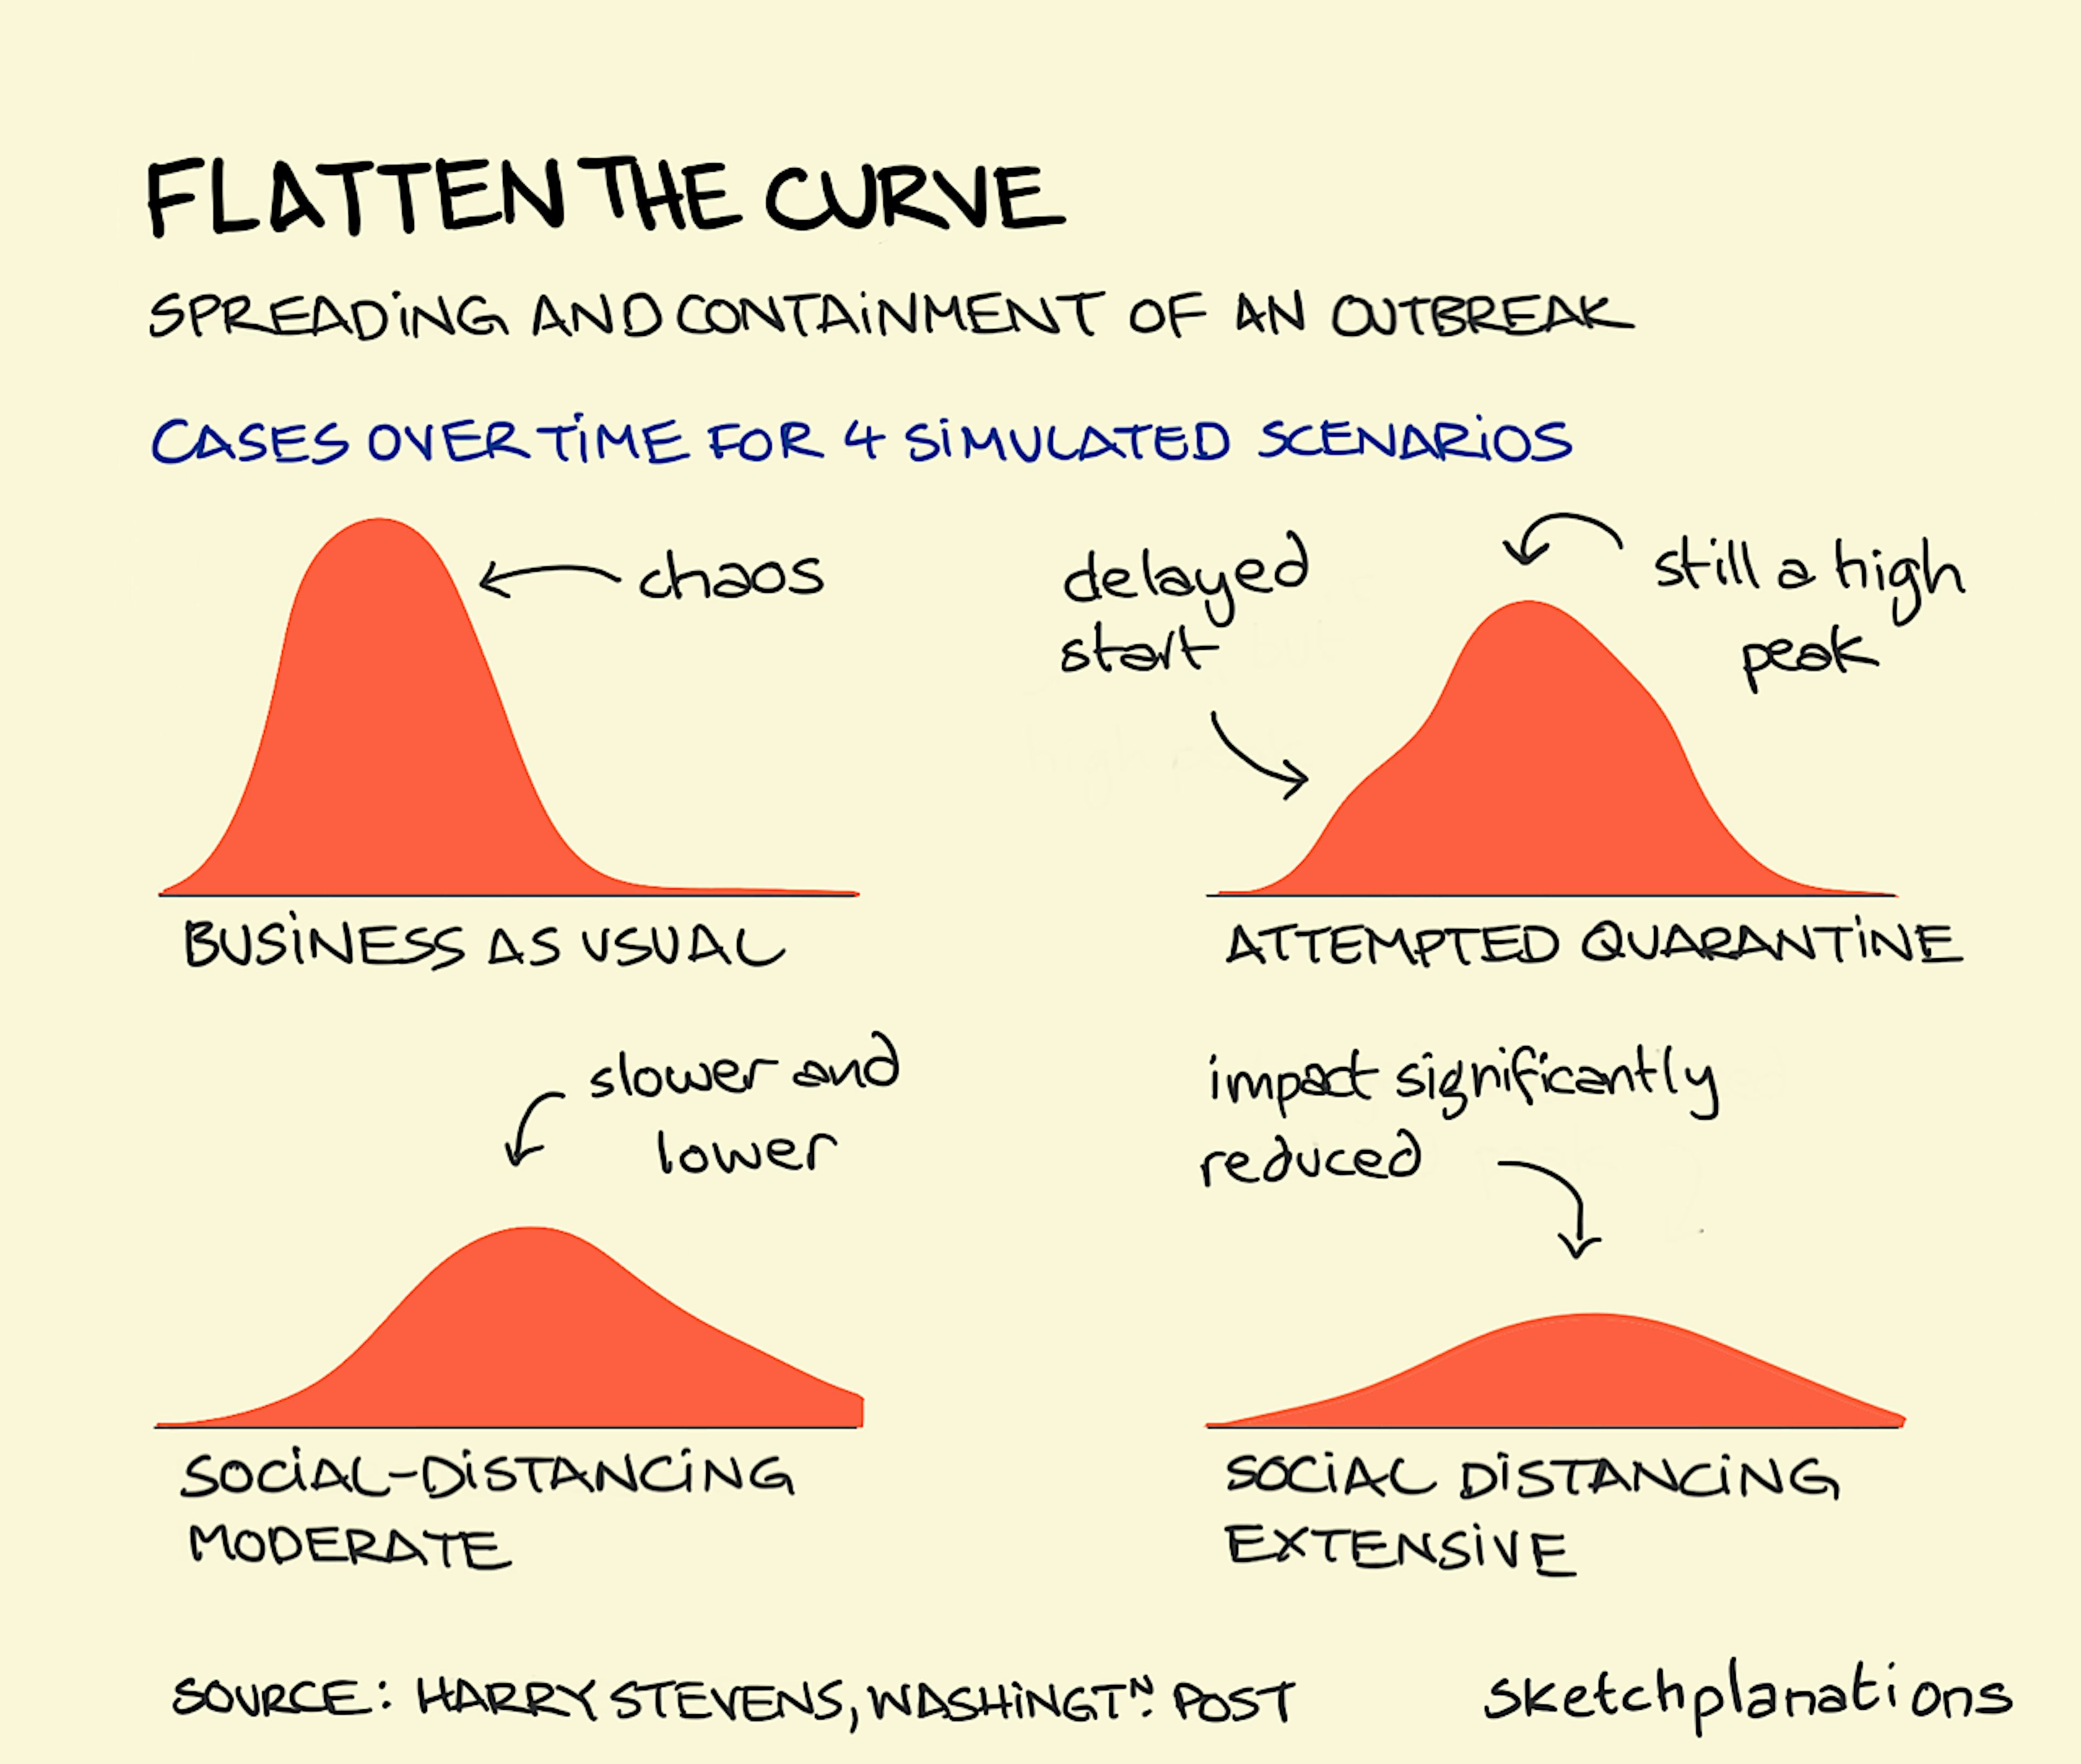 Flatten the Curve illustration: 4 different containment strategies for a contagion outbreak and their expected effect on the number of cases detected over time are shown through a series of distribution curves. 